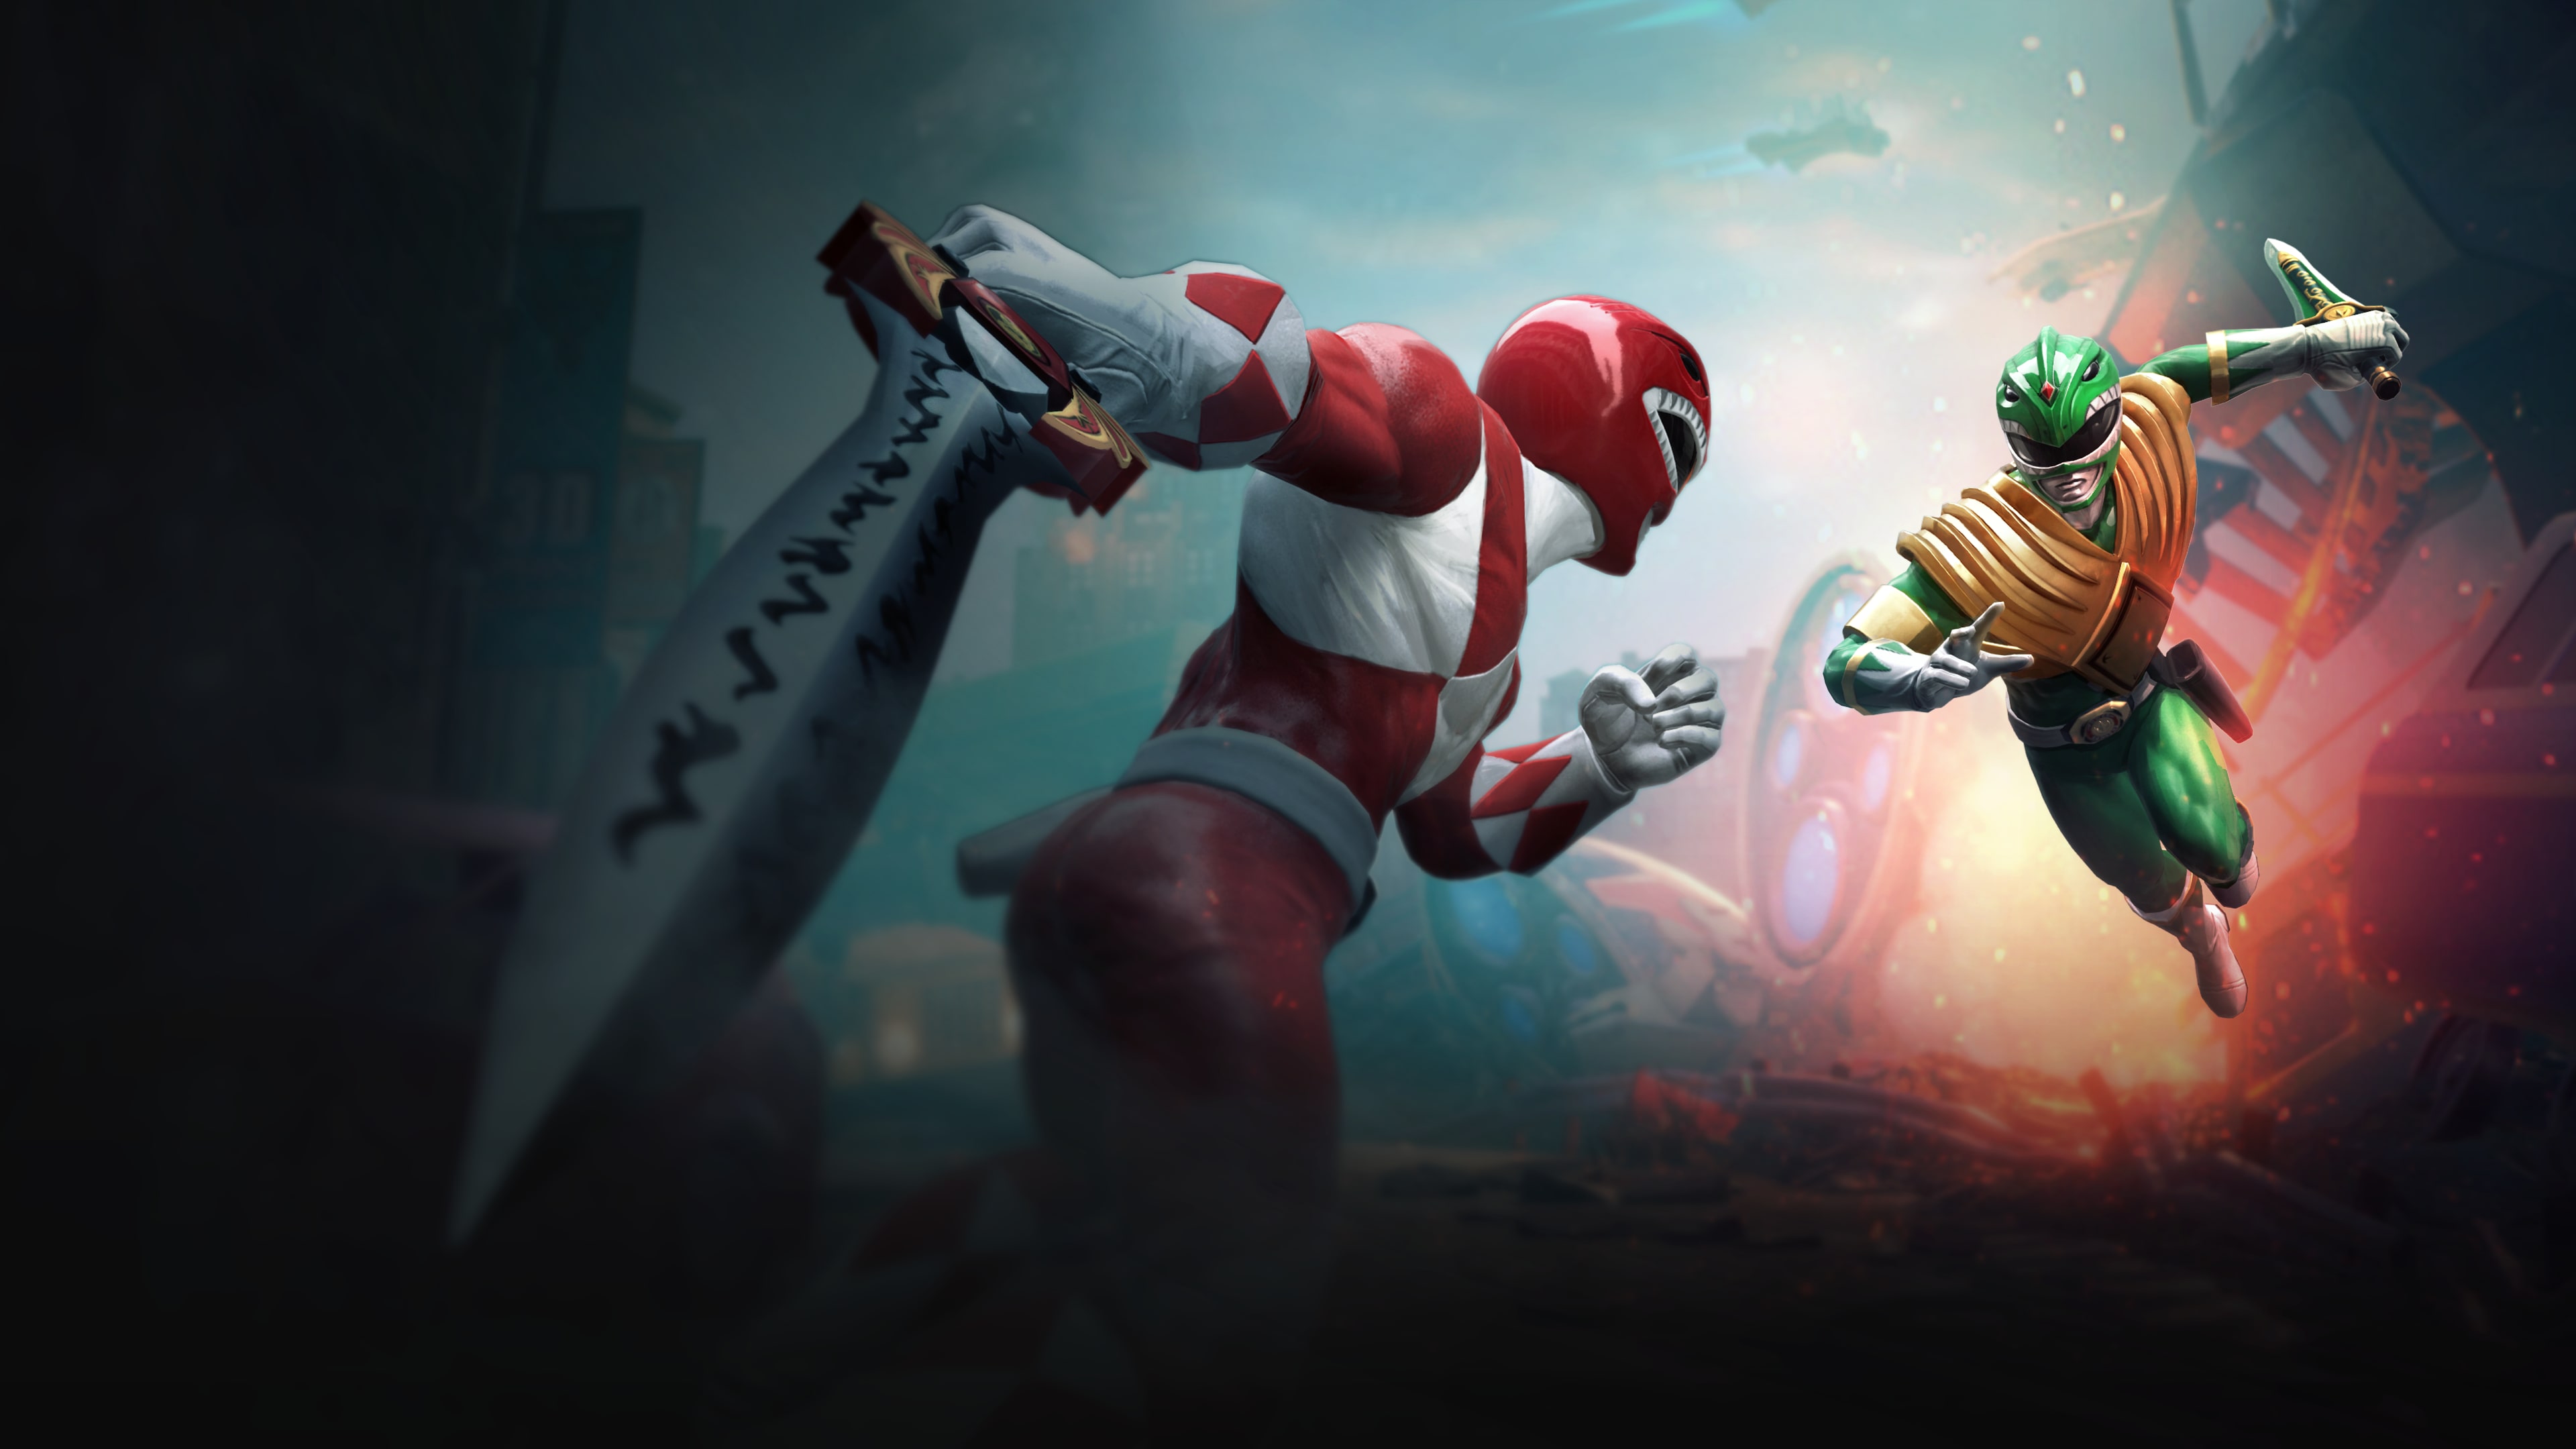 Power Rangers: Battle For The Grid - Collector's Edition